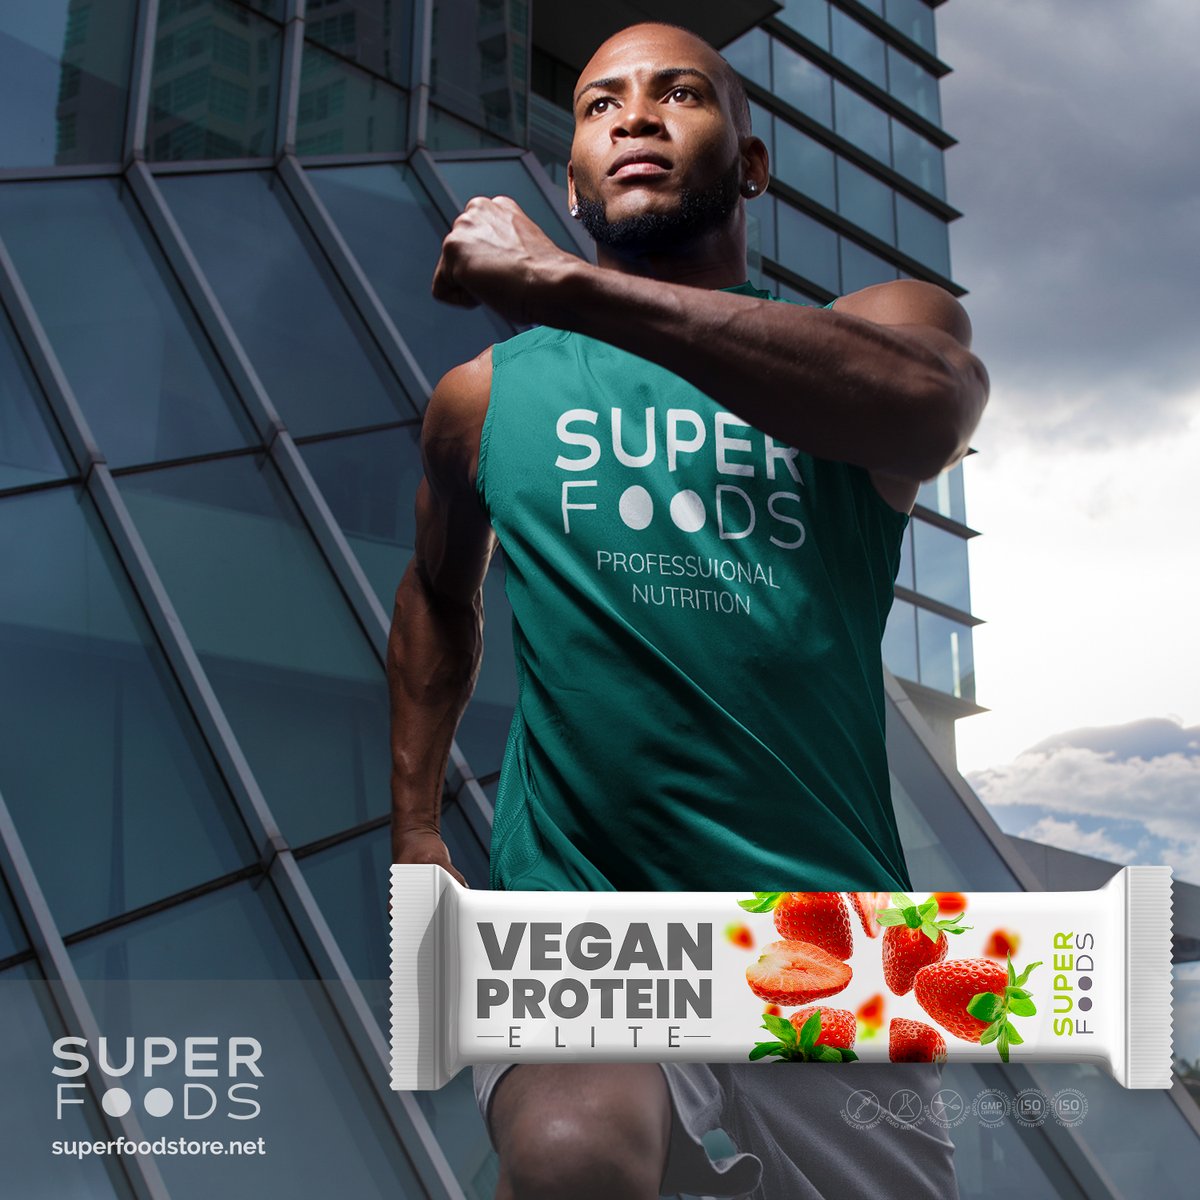 ✨ SUPERFOODS VEGAN PROTEIN Elite - Strawberry Flavored Vegan Protein Bar ✨ 🍓 Experience a new dimension of flavor with our most delicious vegan protein bar yet! Infused with the taste of strawberries and made from the finest quality ingredients, every bite lets you feel the